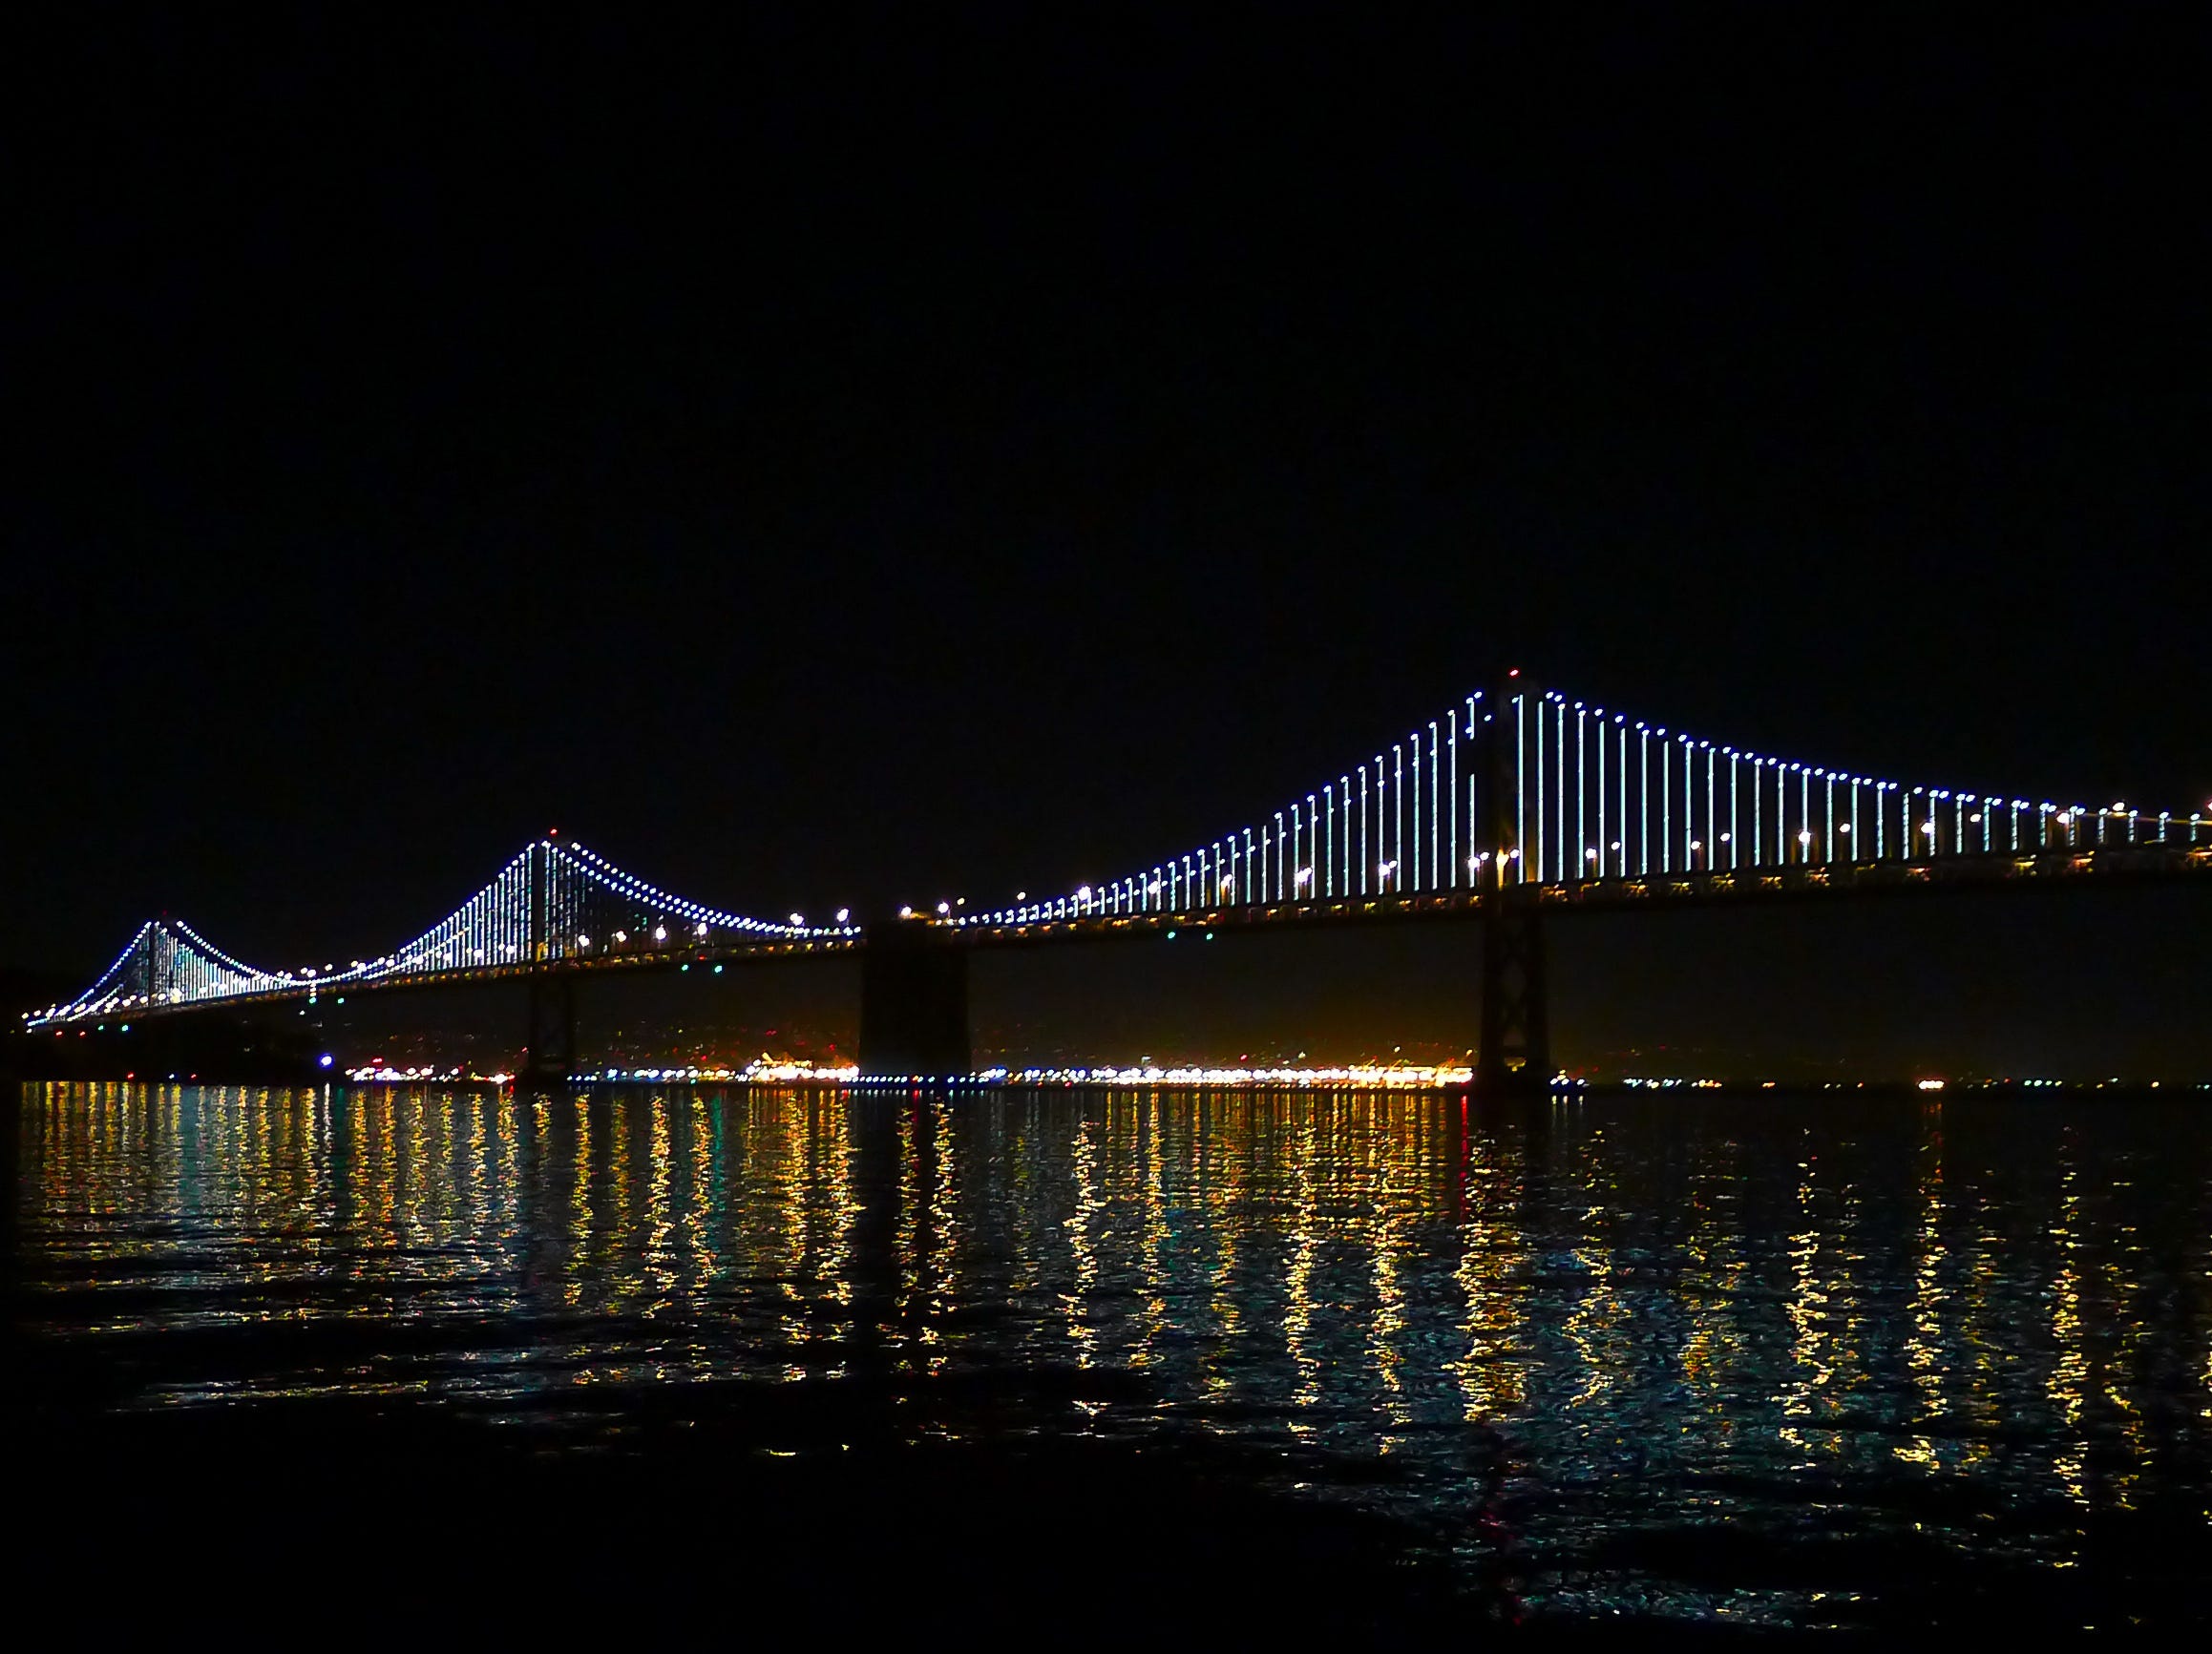 The Bay Bridge with its illuminated cables, as seen at night, above still, reflective waters.